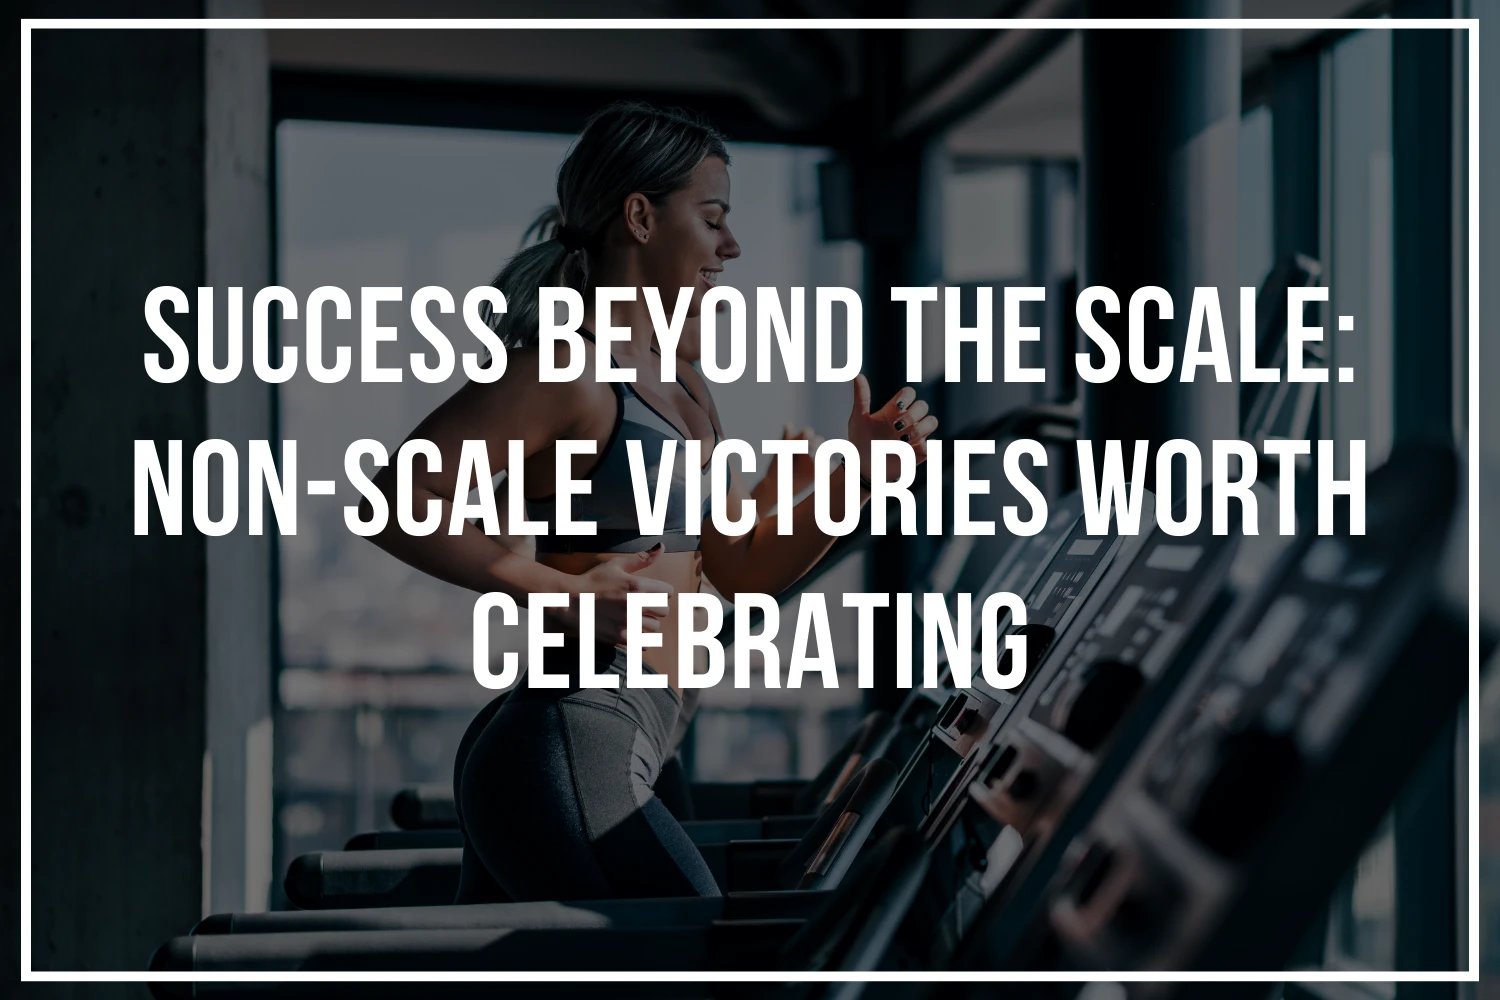 Non-scale victories introduction